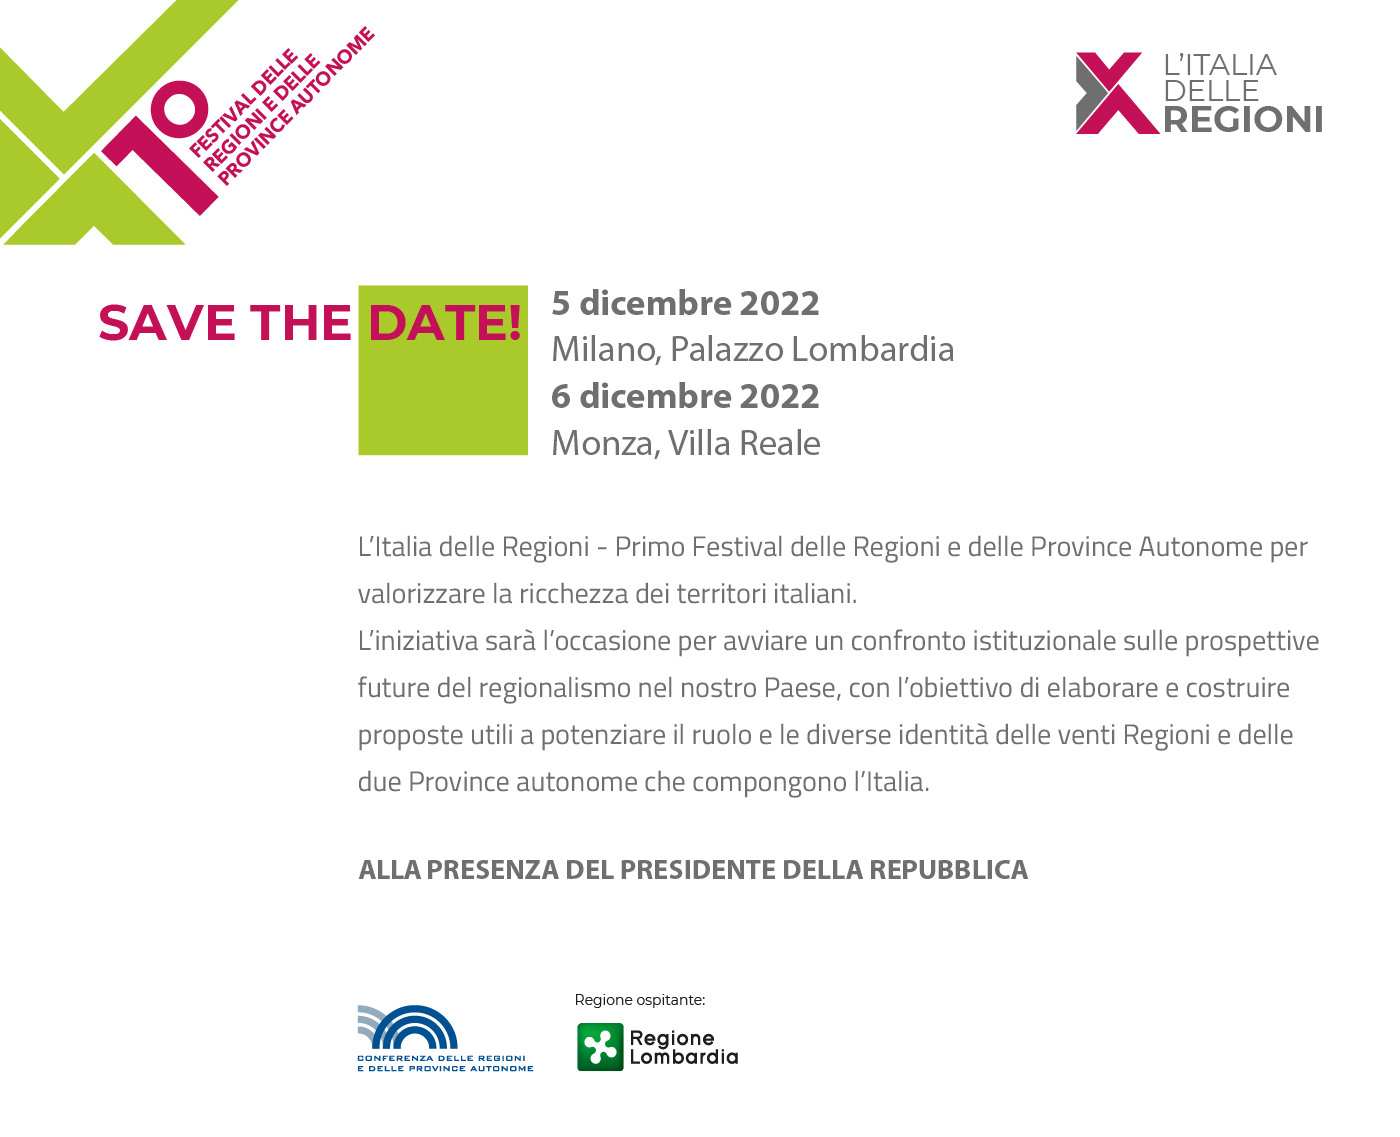 file/ELEMENTO_NEWSLETTER/24929/Save-the-date_UFFICIALE_festival_regioni_5_6_12_22_NL.png